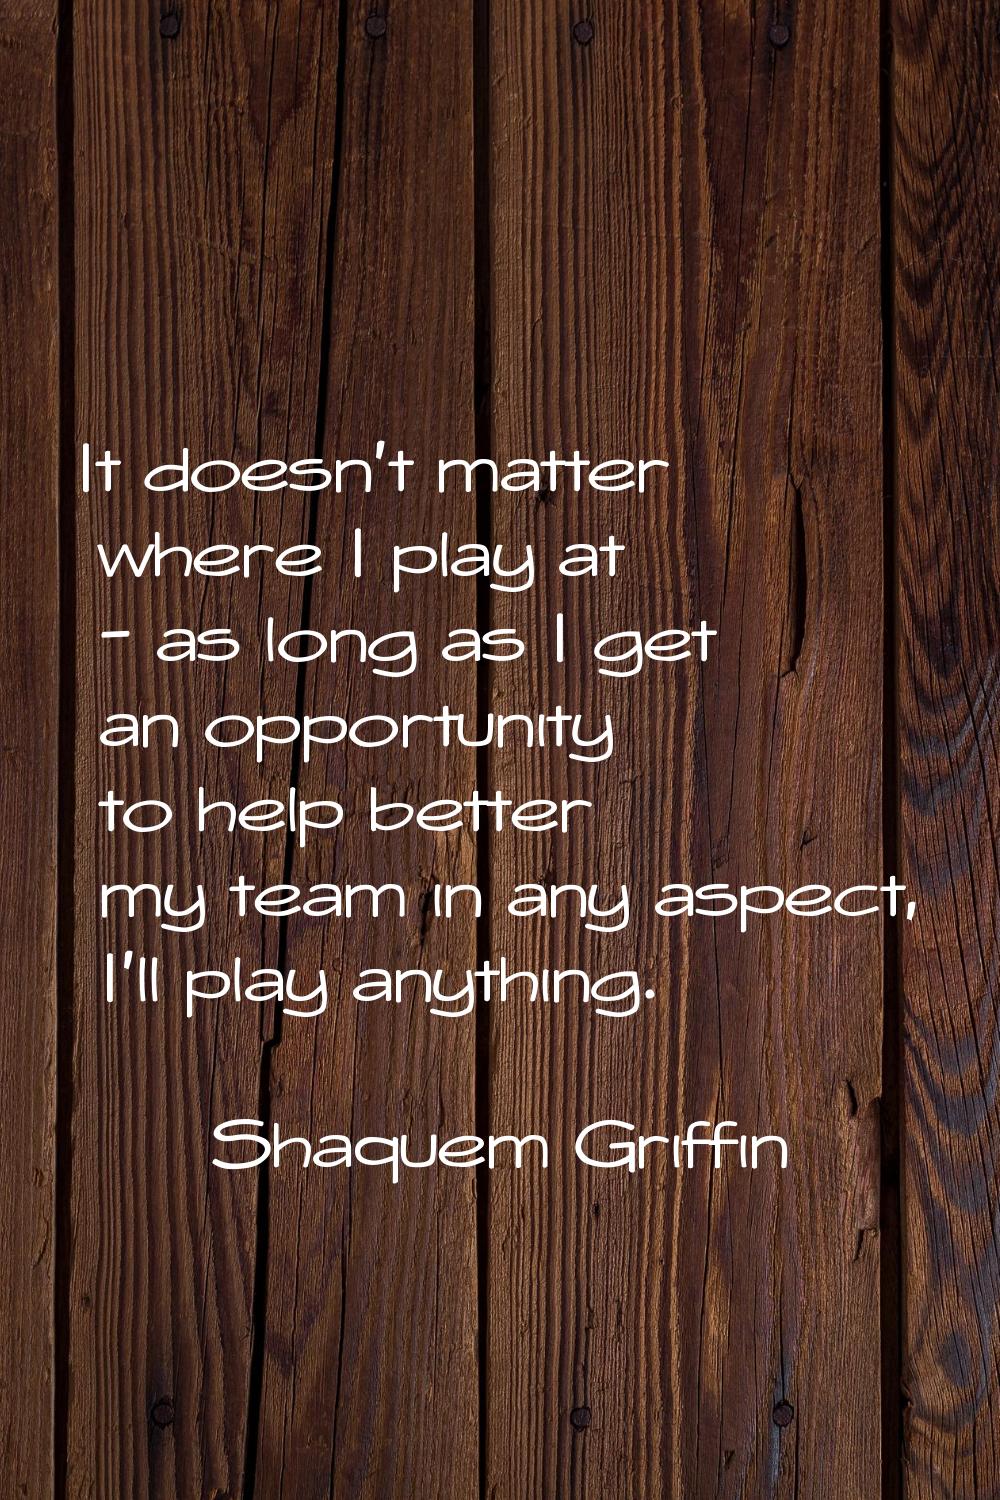 It doesn't matter where I play at - as long as I get an opportunity to help better my team in any a